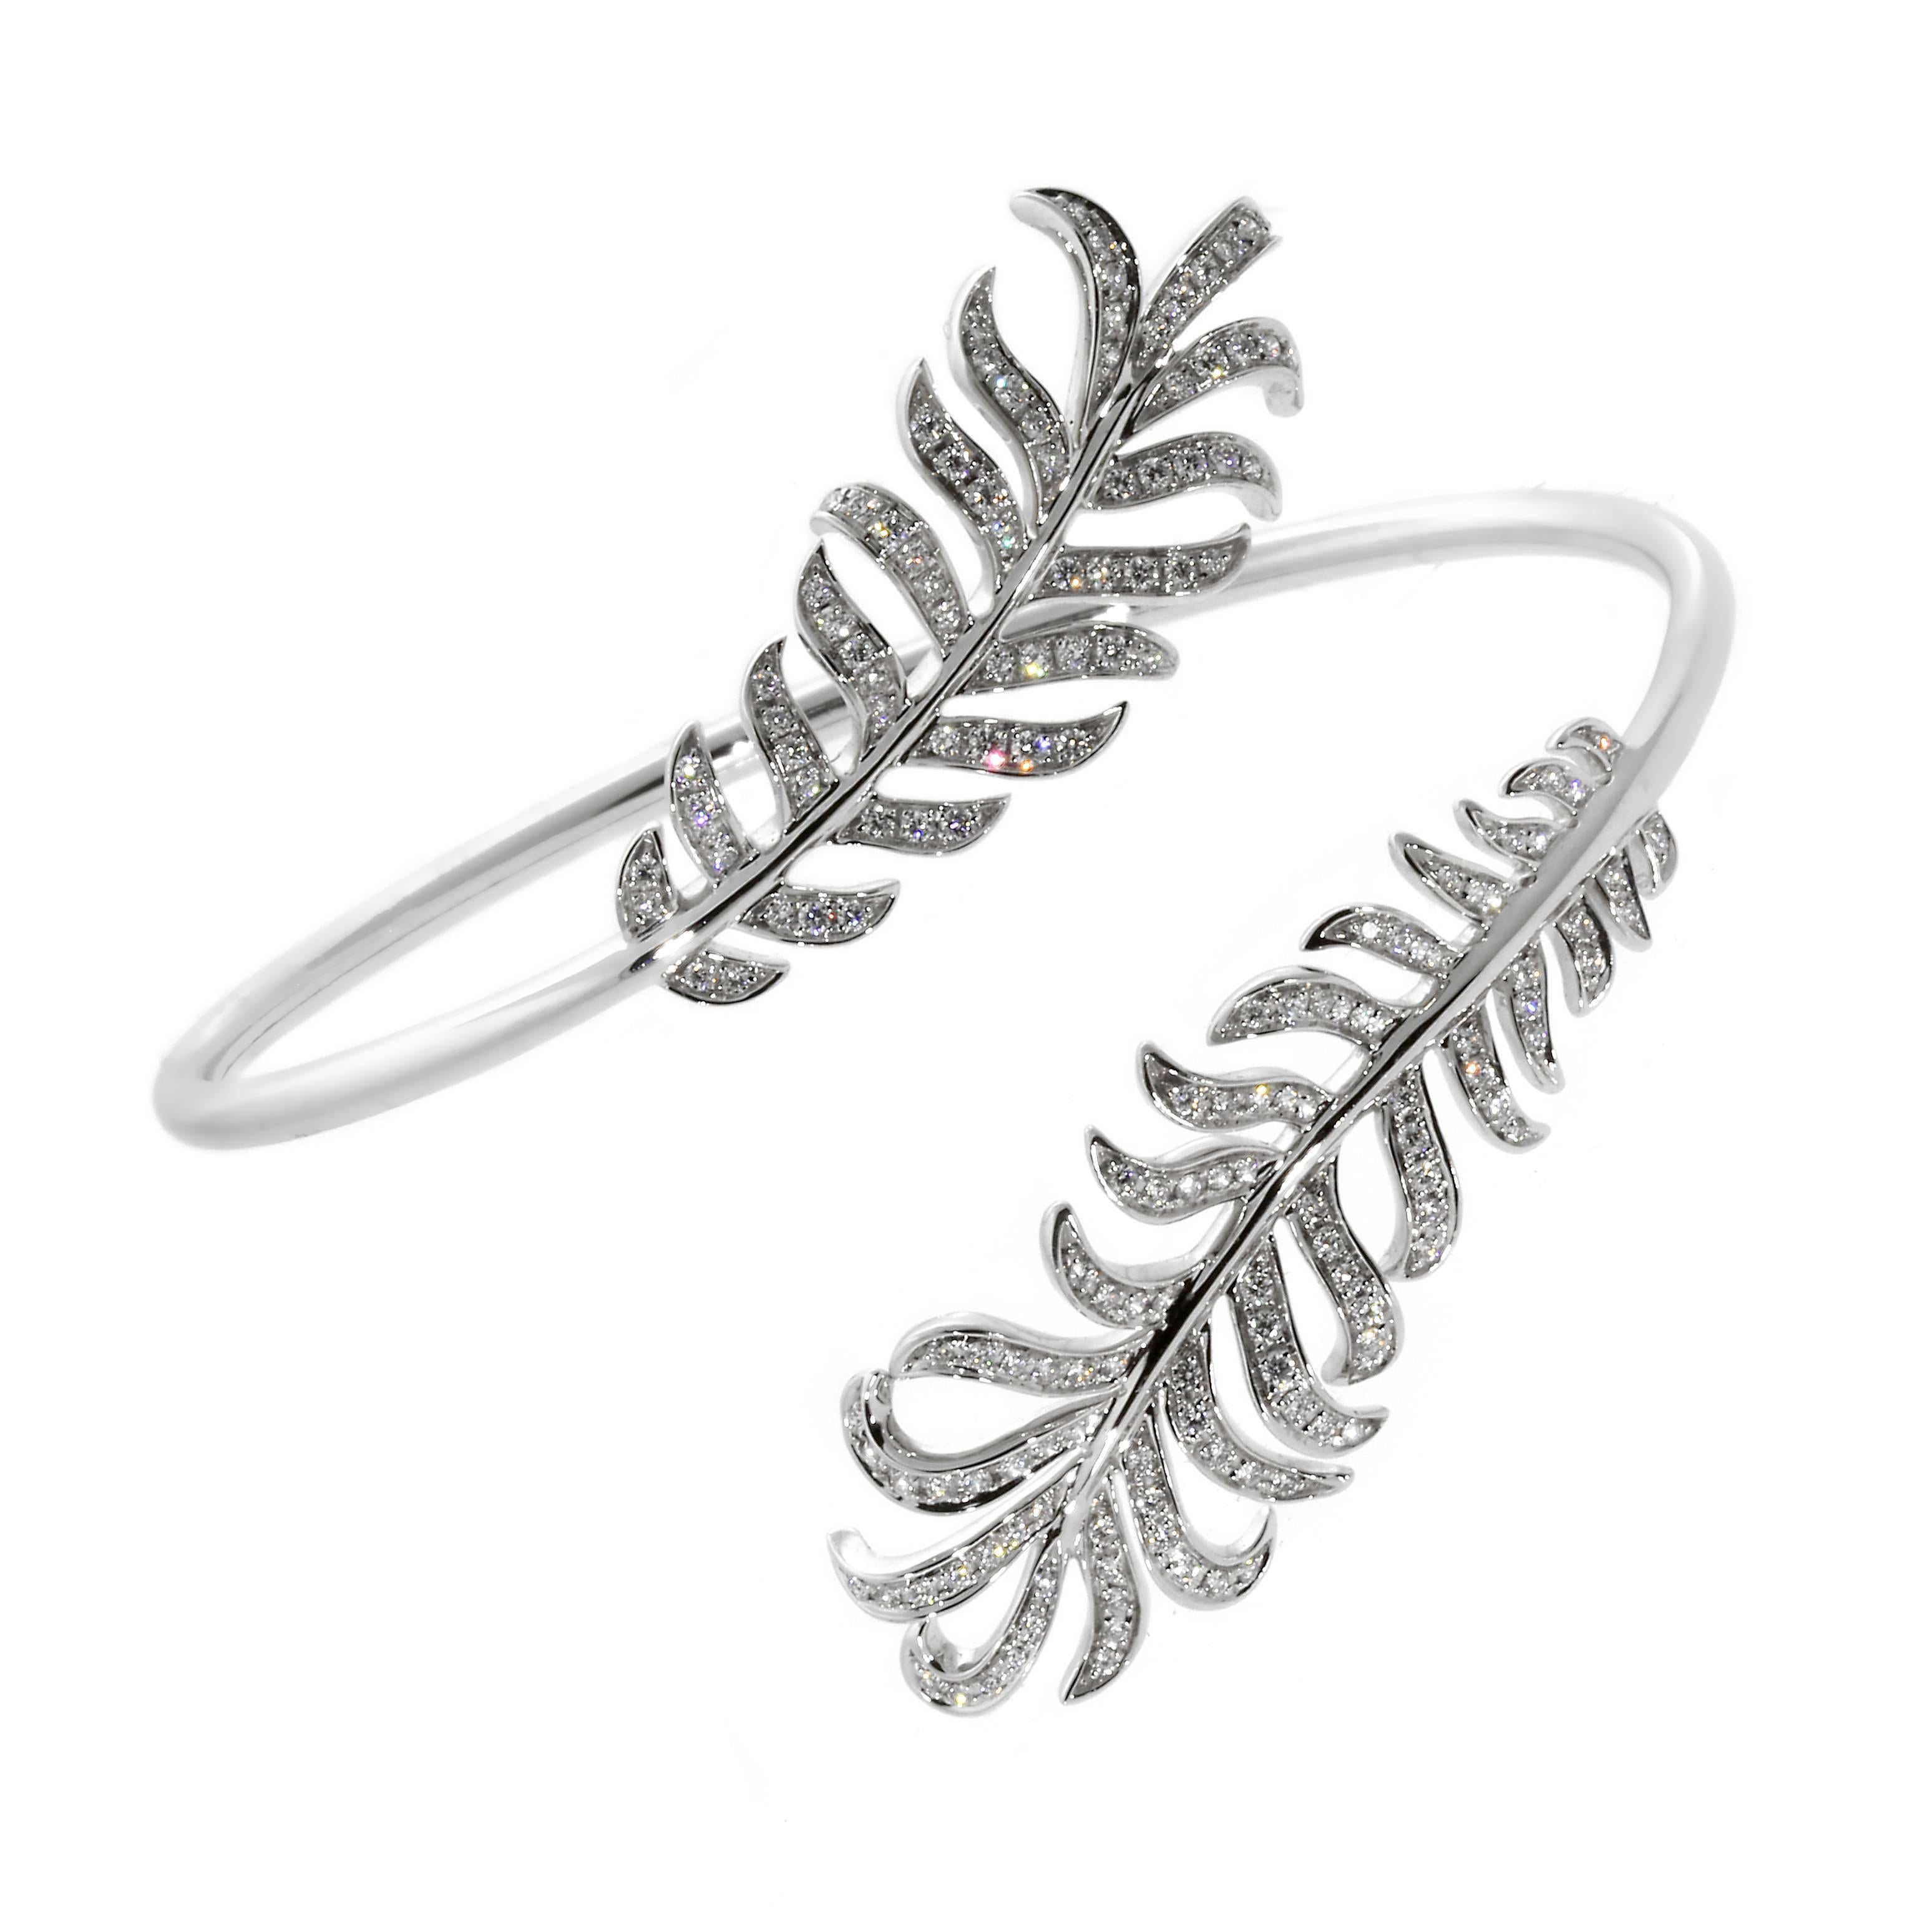 Plume de CHANEL ring - Plume ring in 18K white gold, diamonds and